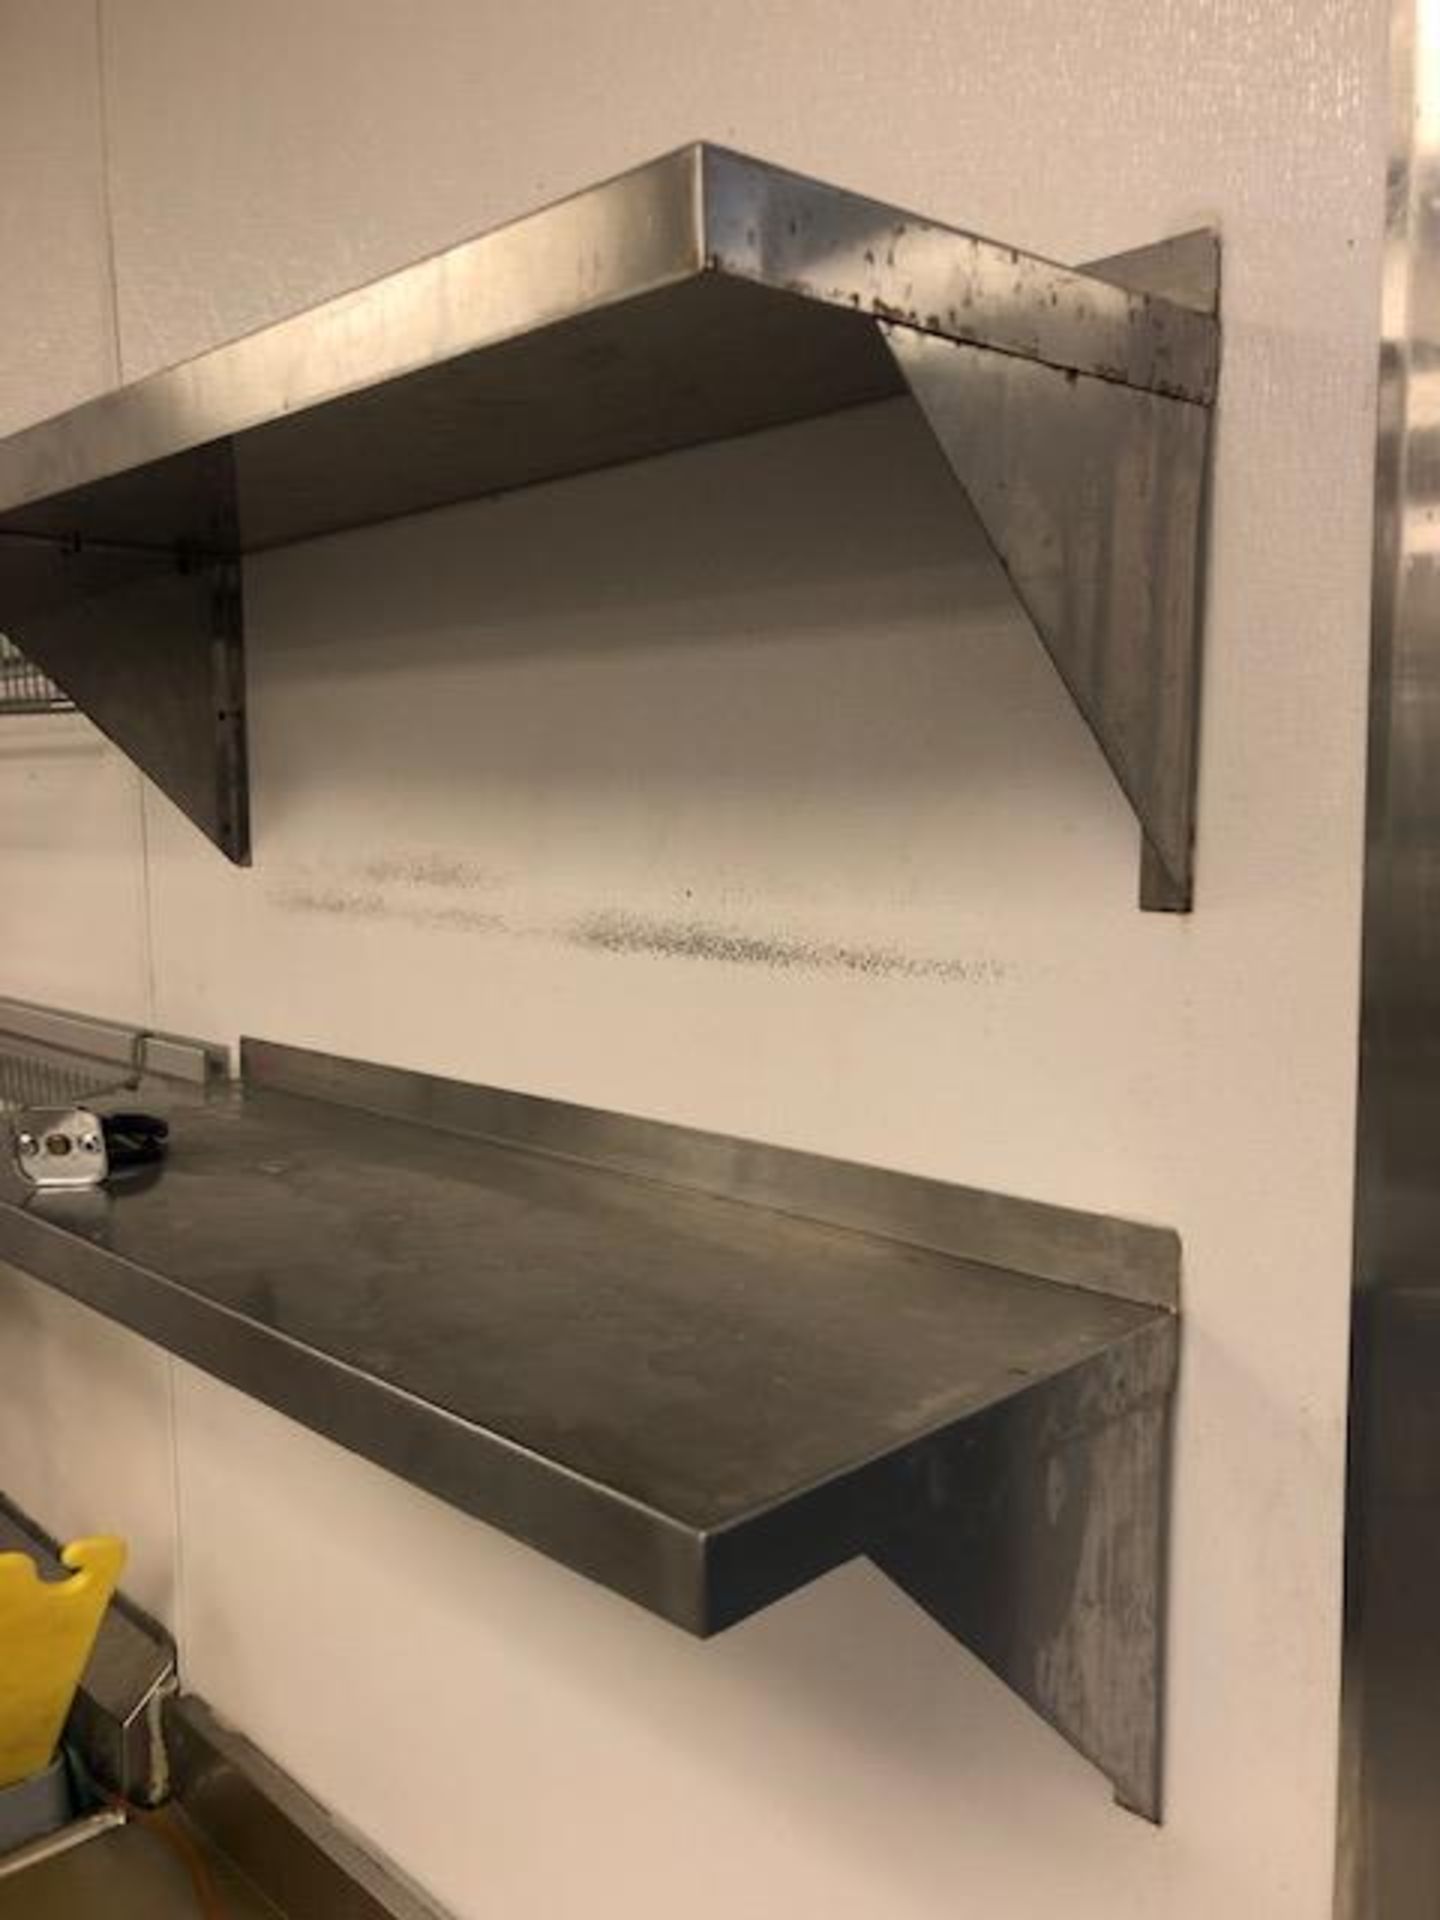 STAINLESS STEEL WALL SHELVES 3 FOOT. SET OF 2 - Image 2 of 4